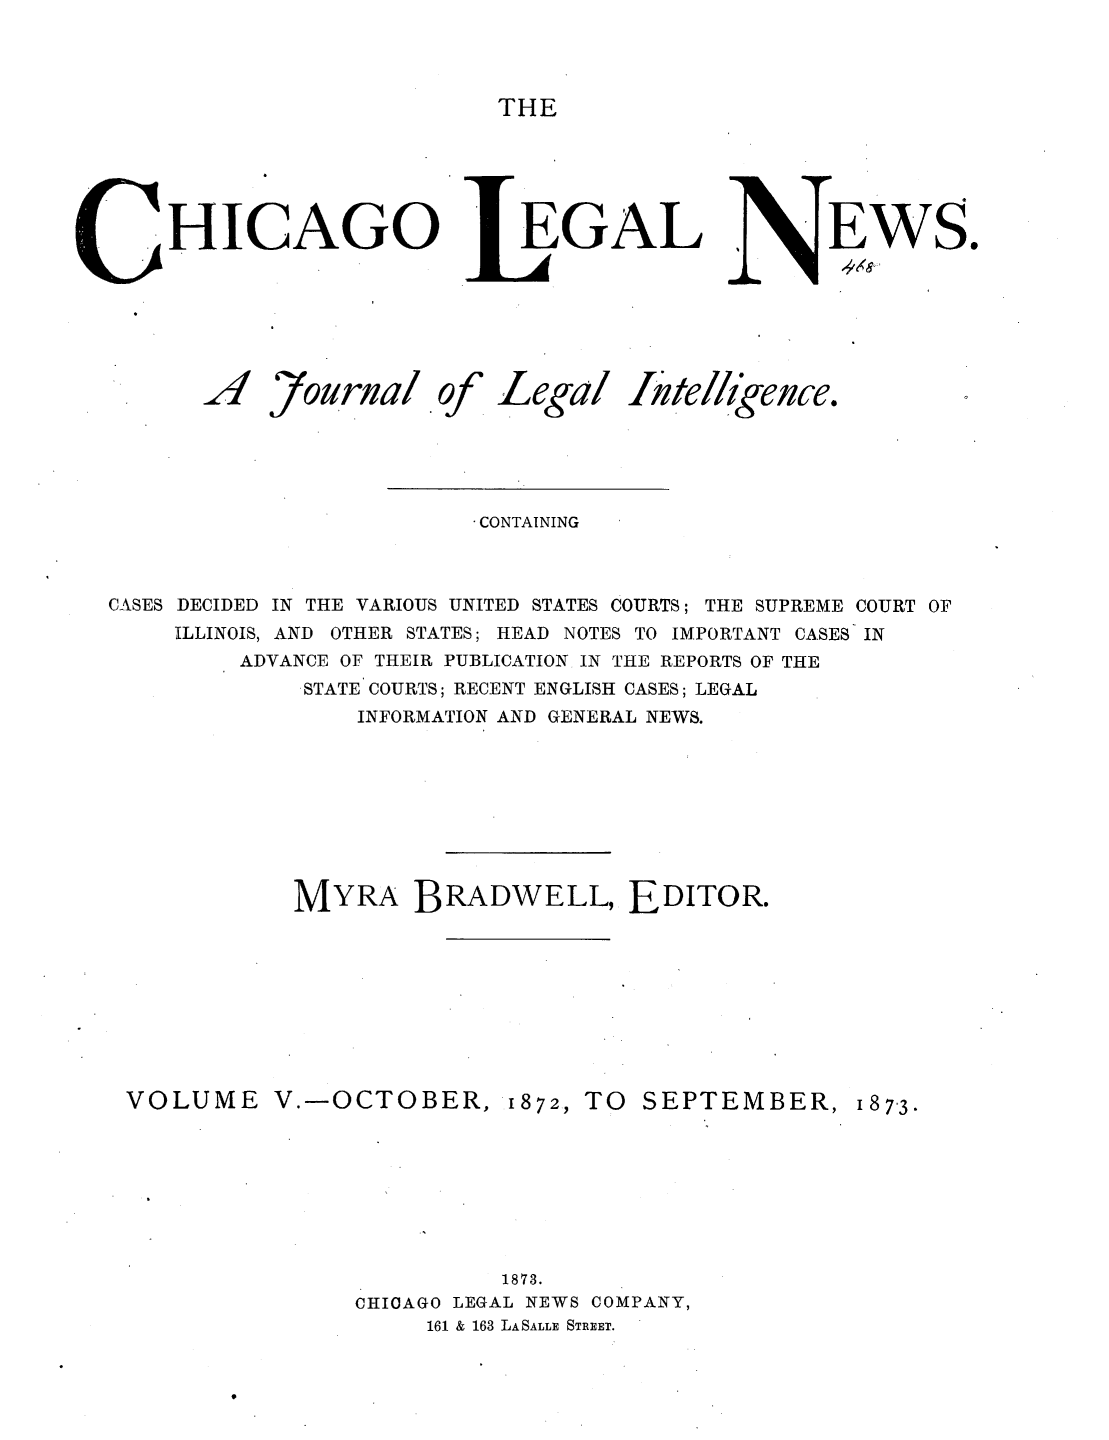 handle is hein.journals/chiclene5 and id is 1 raw text is: THEHICAGO J4 7ournal of[EGALLegal IteCONTAININGCASES DECIDED IN THE VARIOUS UNITED STATES COURTS; THE SUPREME COURT OFILLINOIS, AND OTHER STATES; HEAD NOTES TO IMPORTANT CASES INADVANCE OF THEIR PUBLICATION IN THE REPORTS OF THESTATE COURTS; RECENT ENGLISH CASES; LEGALINFORMATION AND GENERAL NEWS.MYRA BRADWELL, EDITOR.VOLUME V.-OCTOBER,1872, TOSEPTEMBER, 187-3.1873.CHIOAGO LEGAL NEWS COMPANY,161 & 163 LASALLE STREET.EWS.ikence,